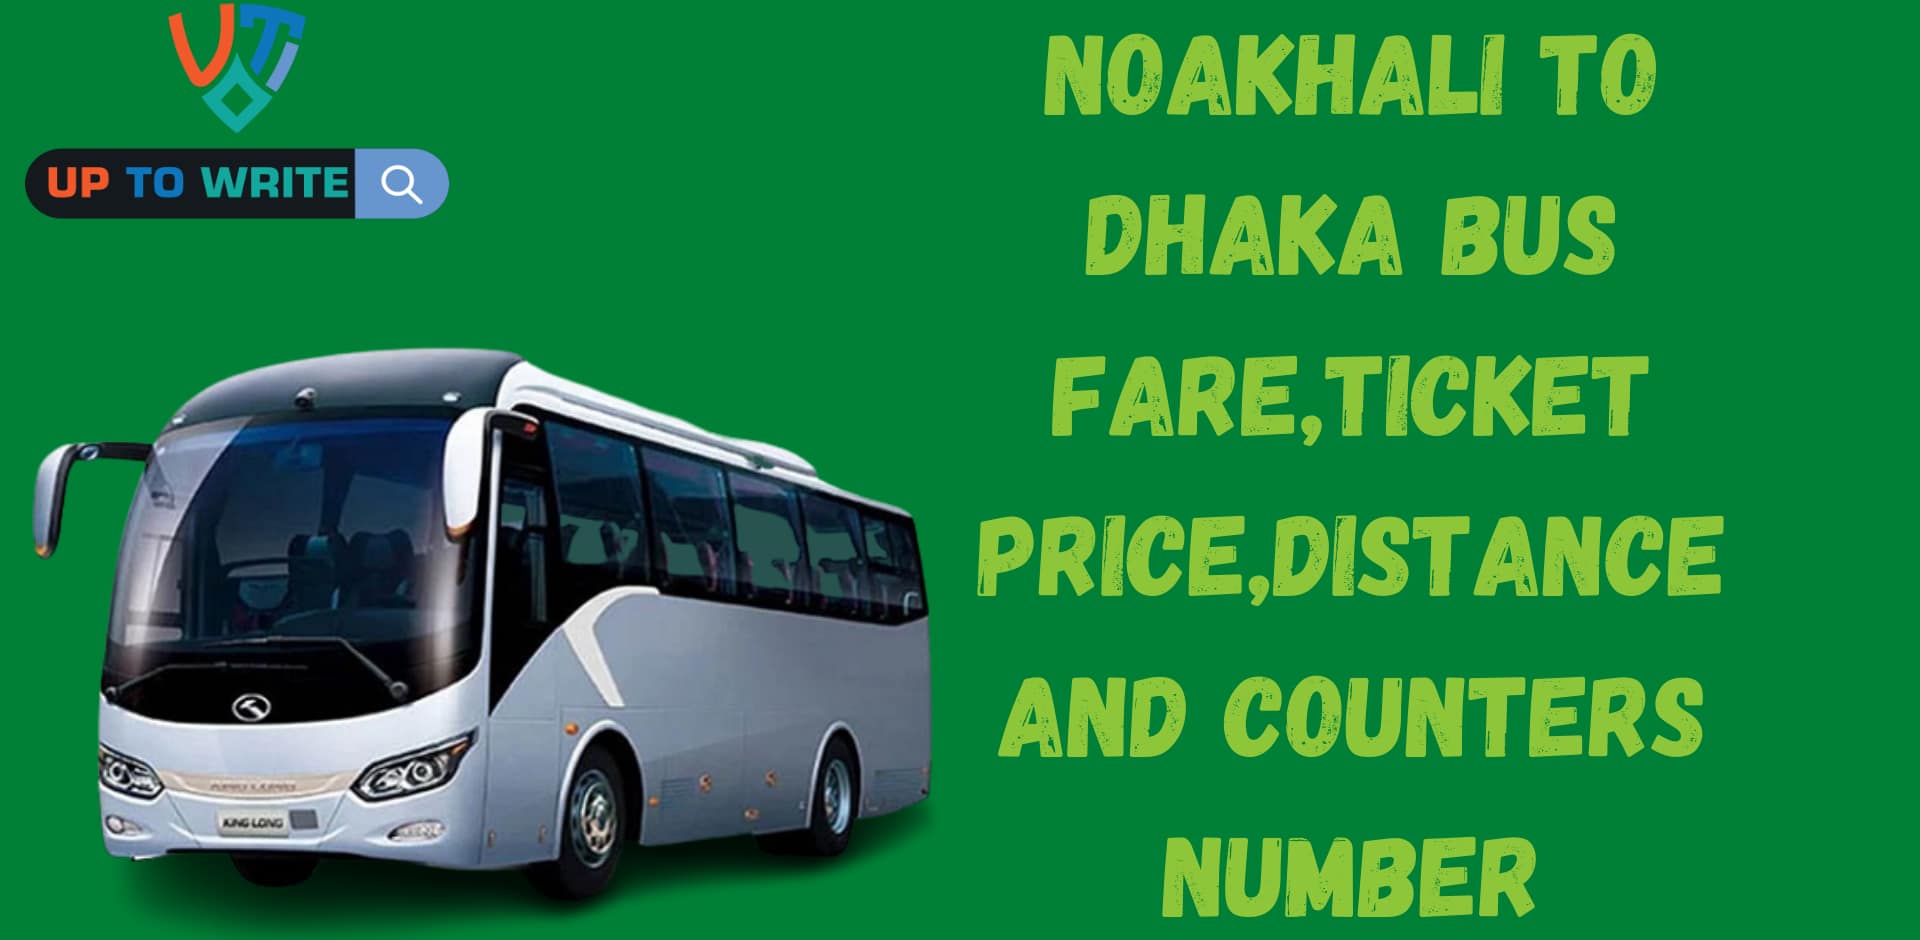 Noakhali To Dhaka Bus Fare,Ticket Price,Distance and Counters Number